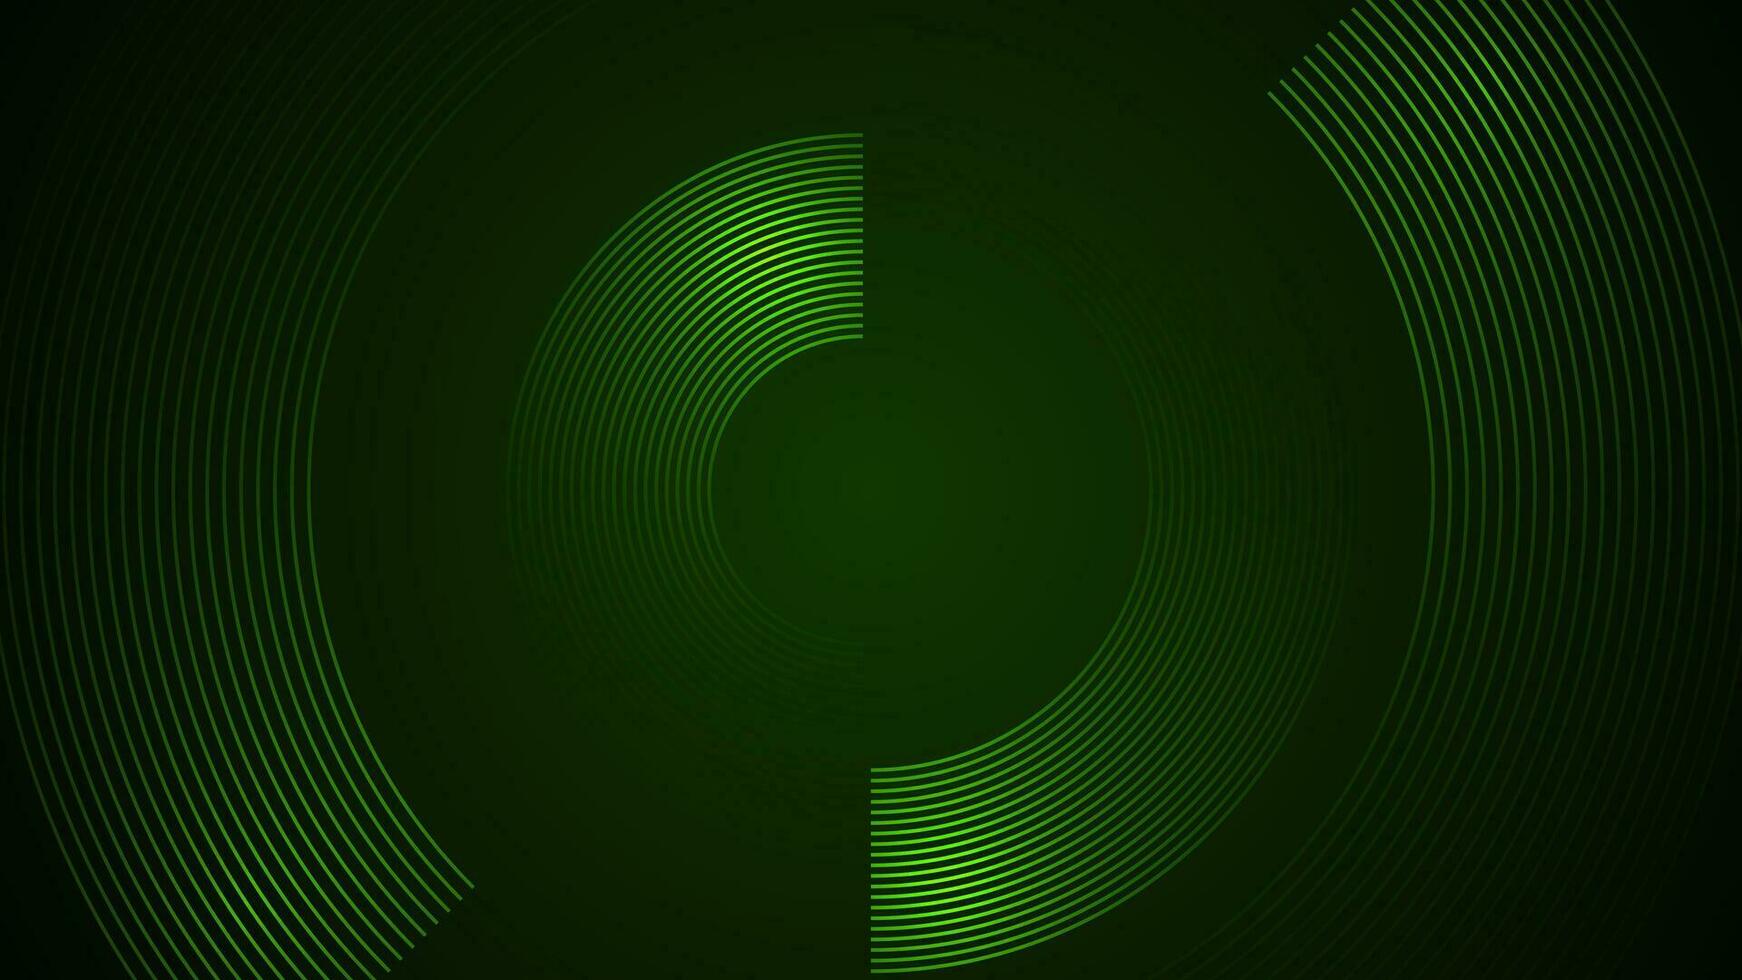 Dark green simple abstract background with lines in a curved style geometric style as the main element. vector